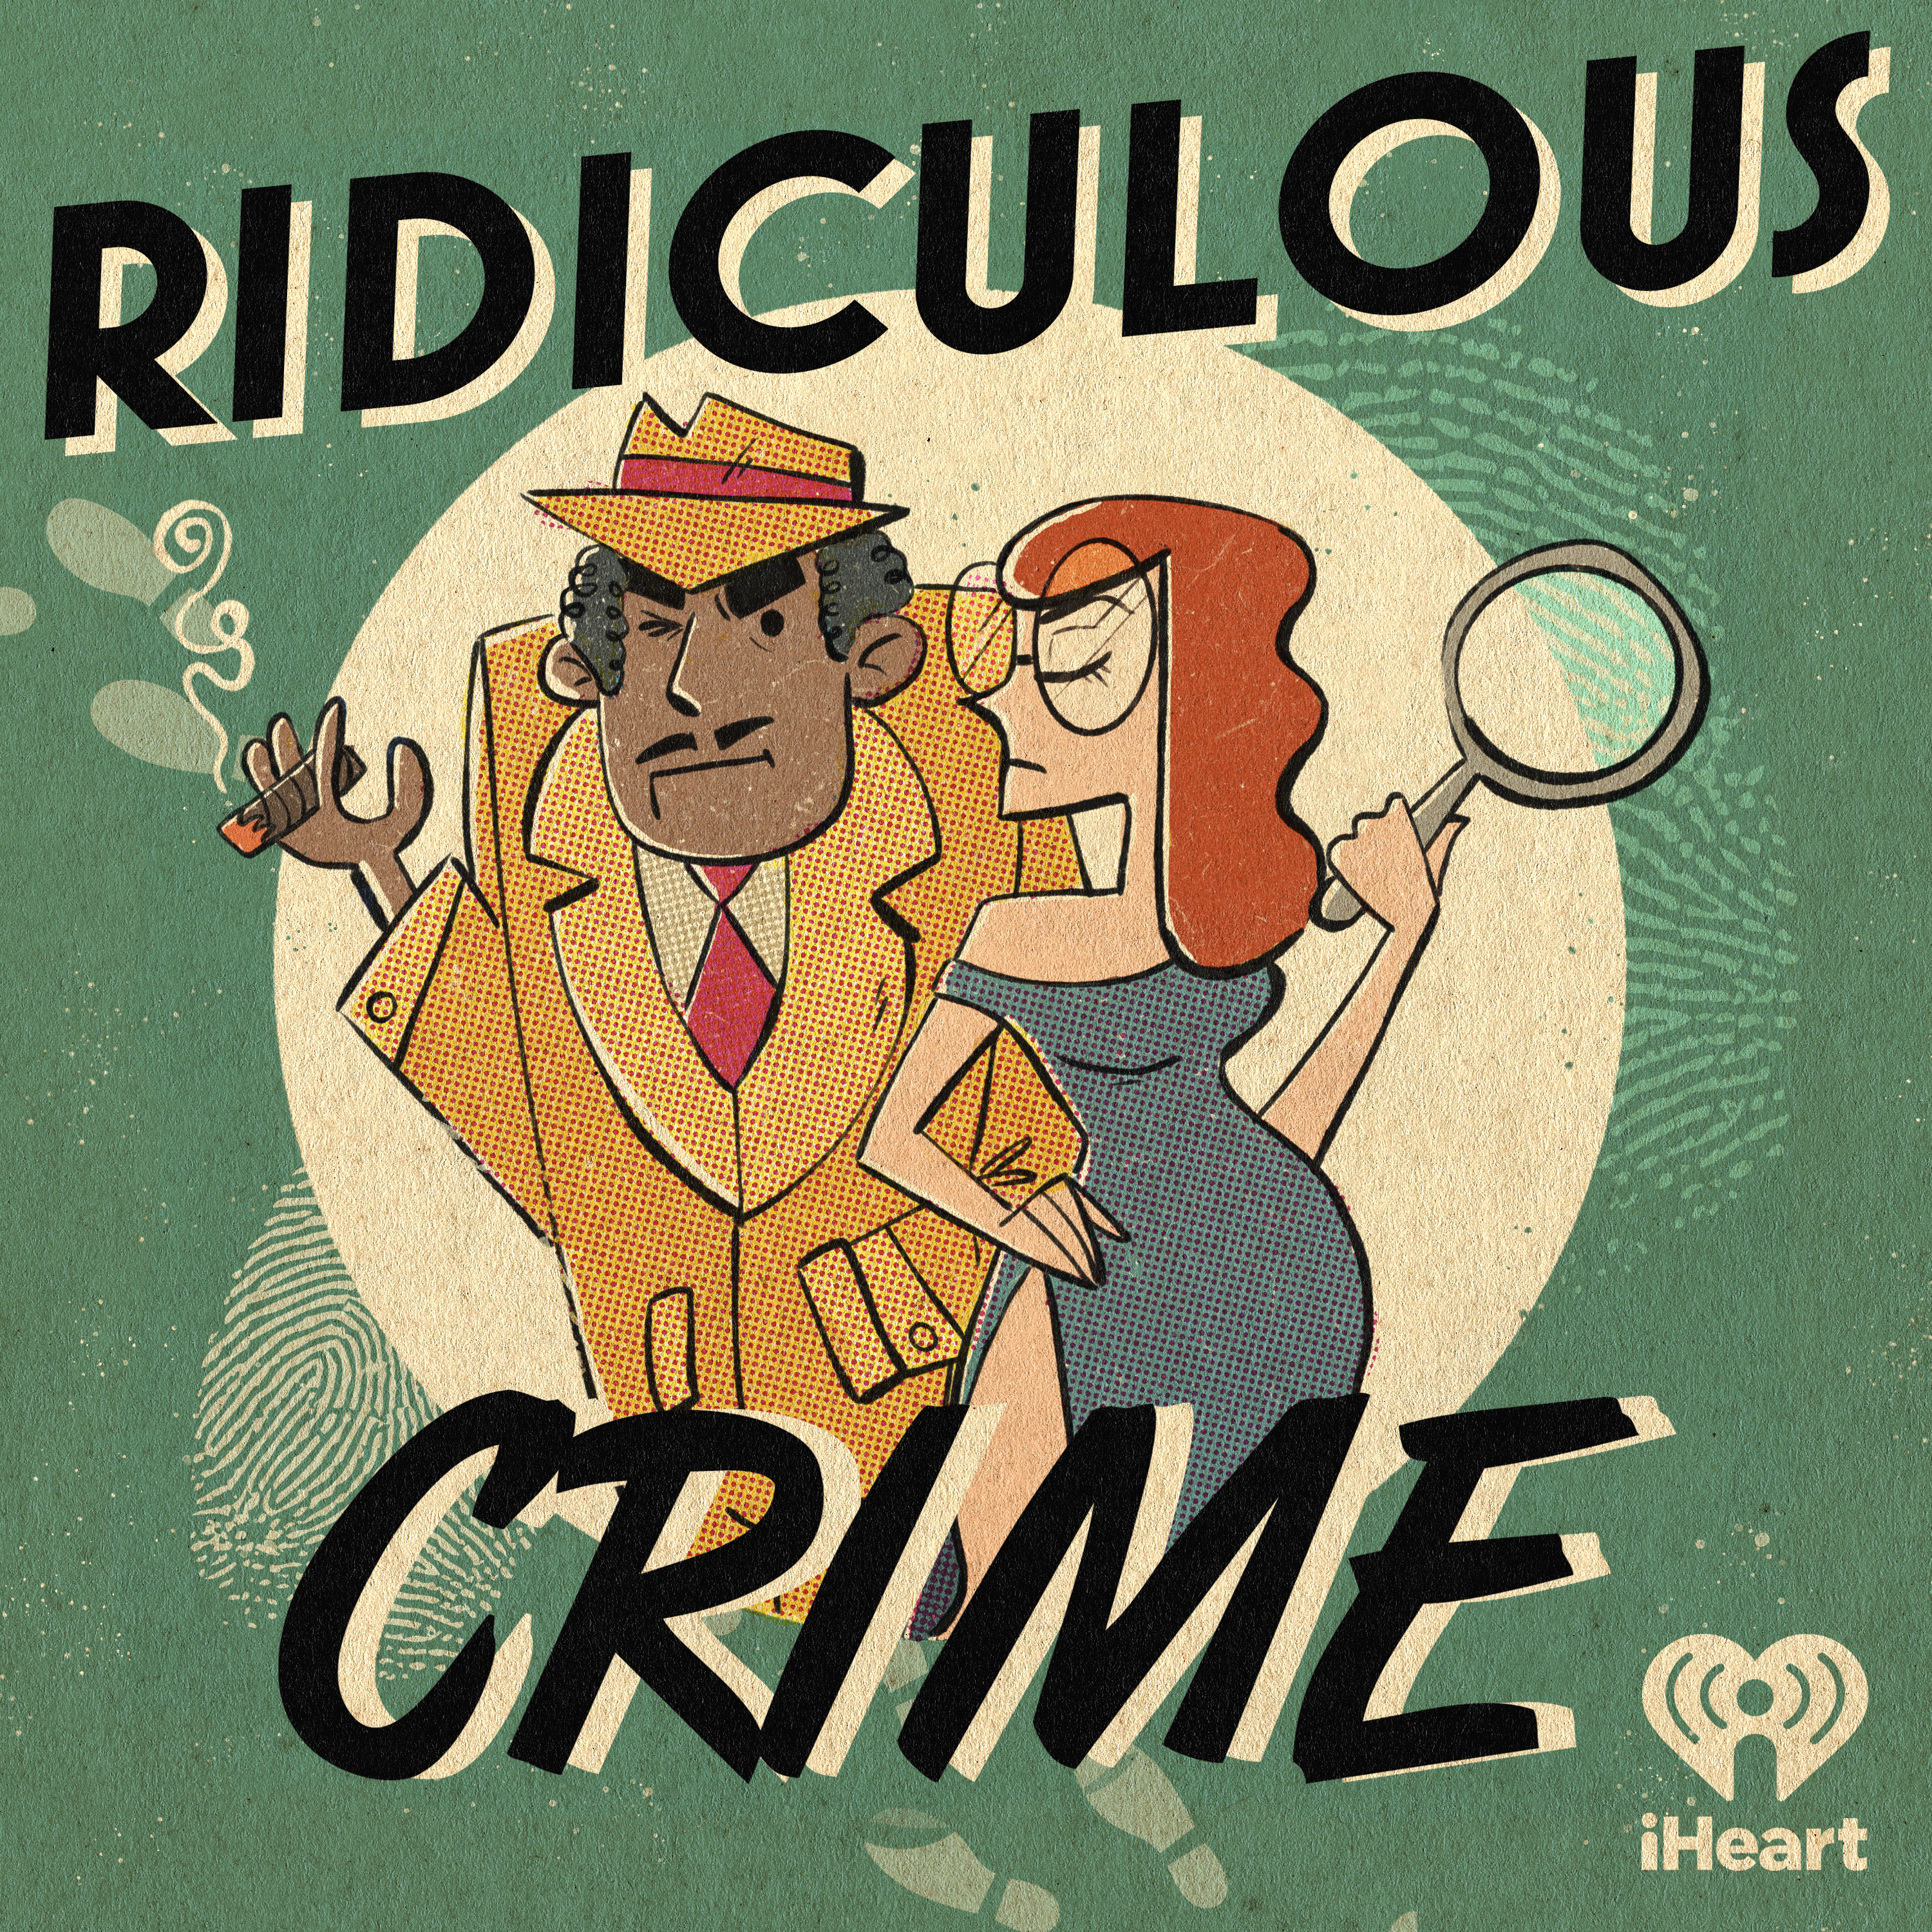 Ridiculous Crime podcast show image